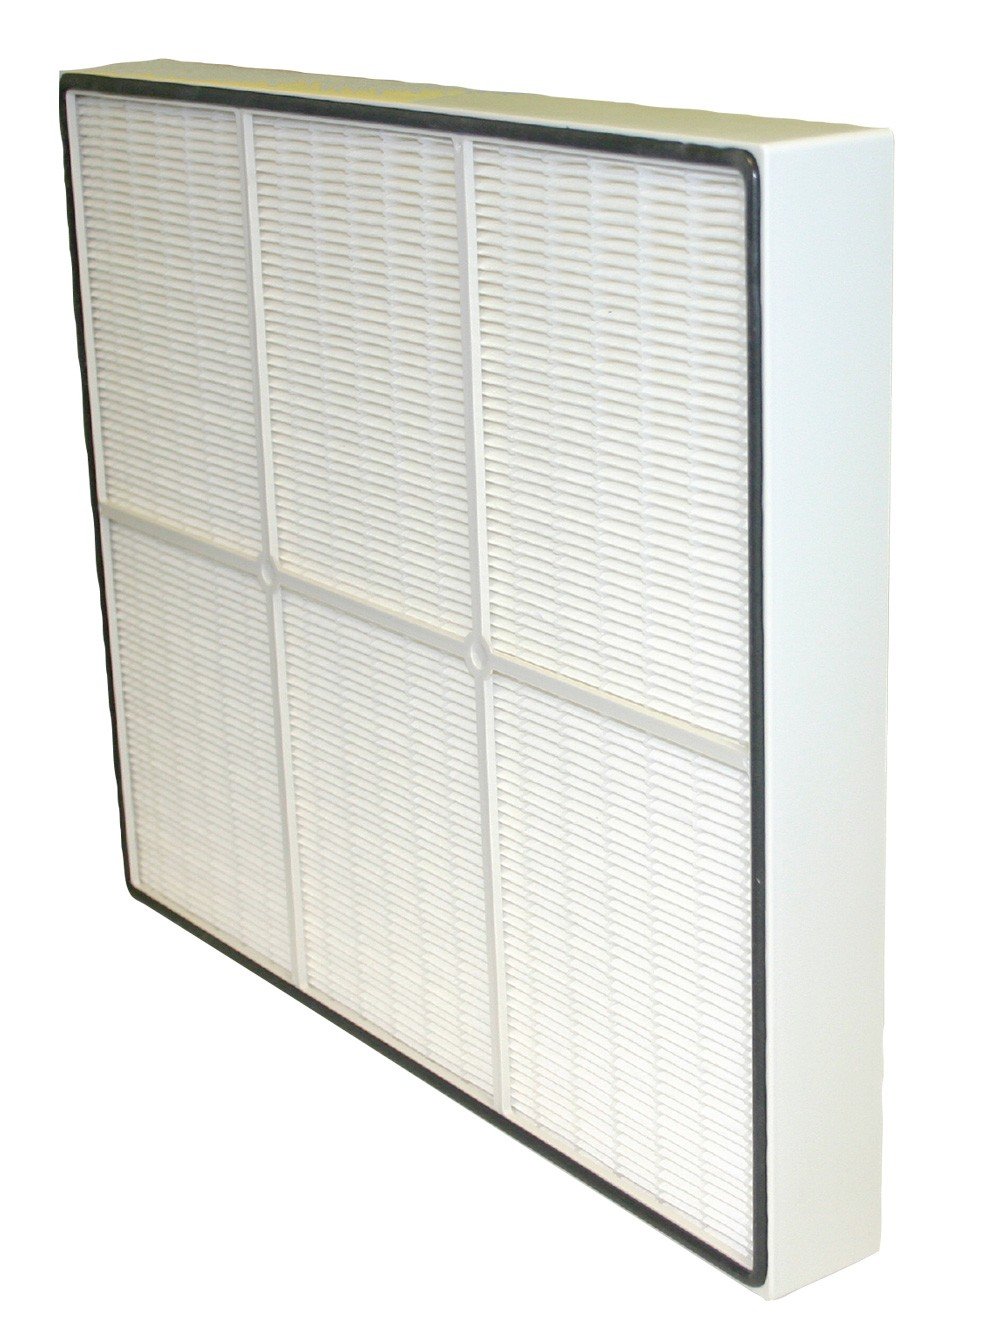 PALLET TO INCLUDE HEPA FILTERS FROM CAS  AAPPROX RRP £700, High Efficiency Particulate Air (HEPA) filters are used to create superior indoor air quality for industries that require the highest level